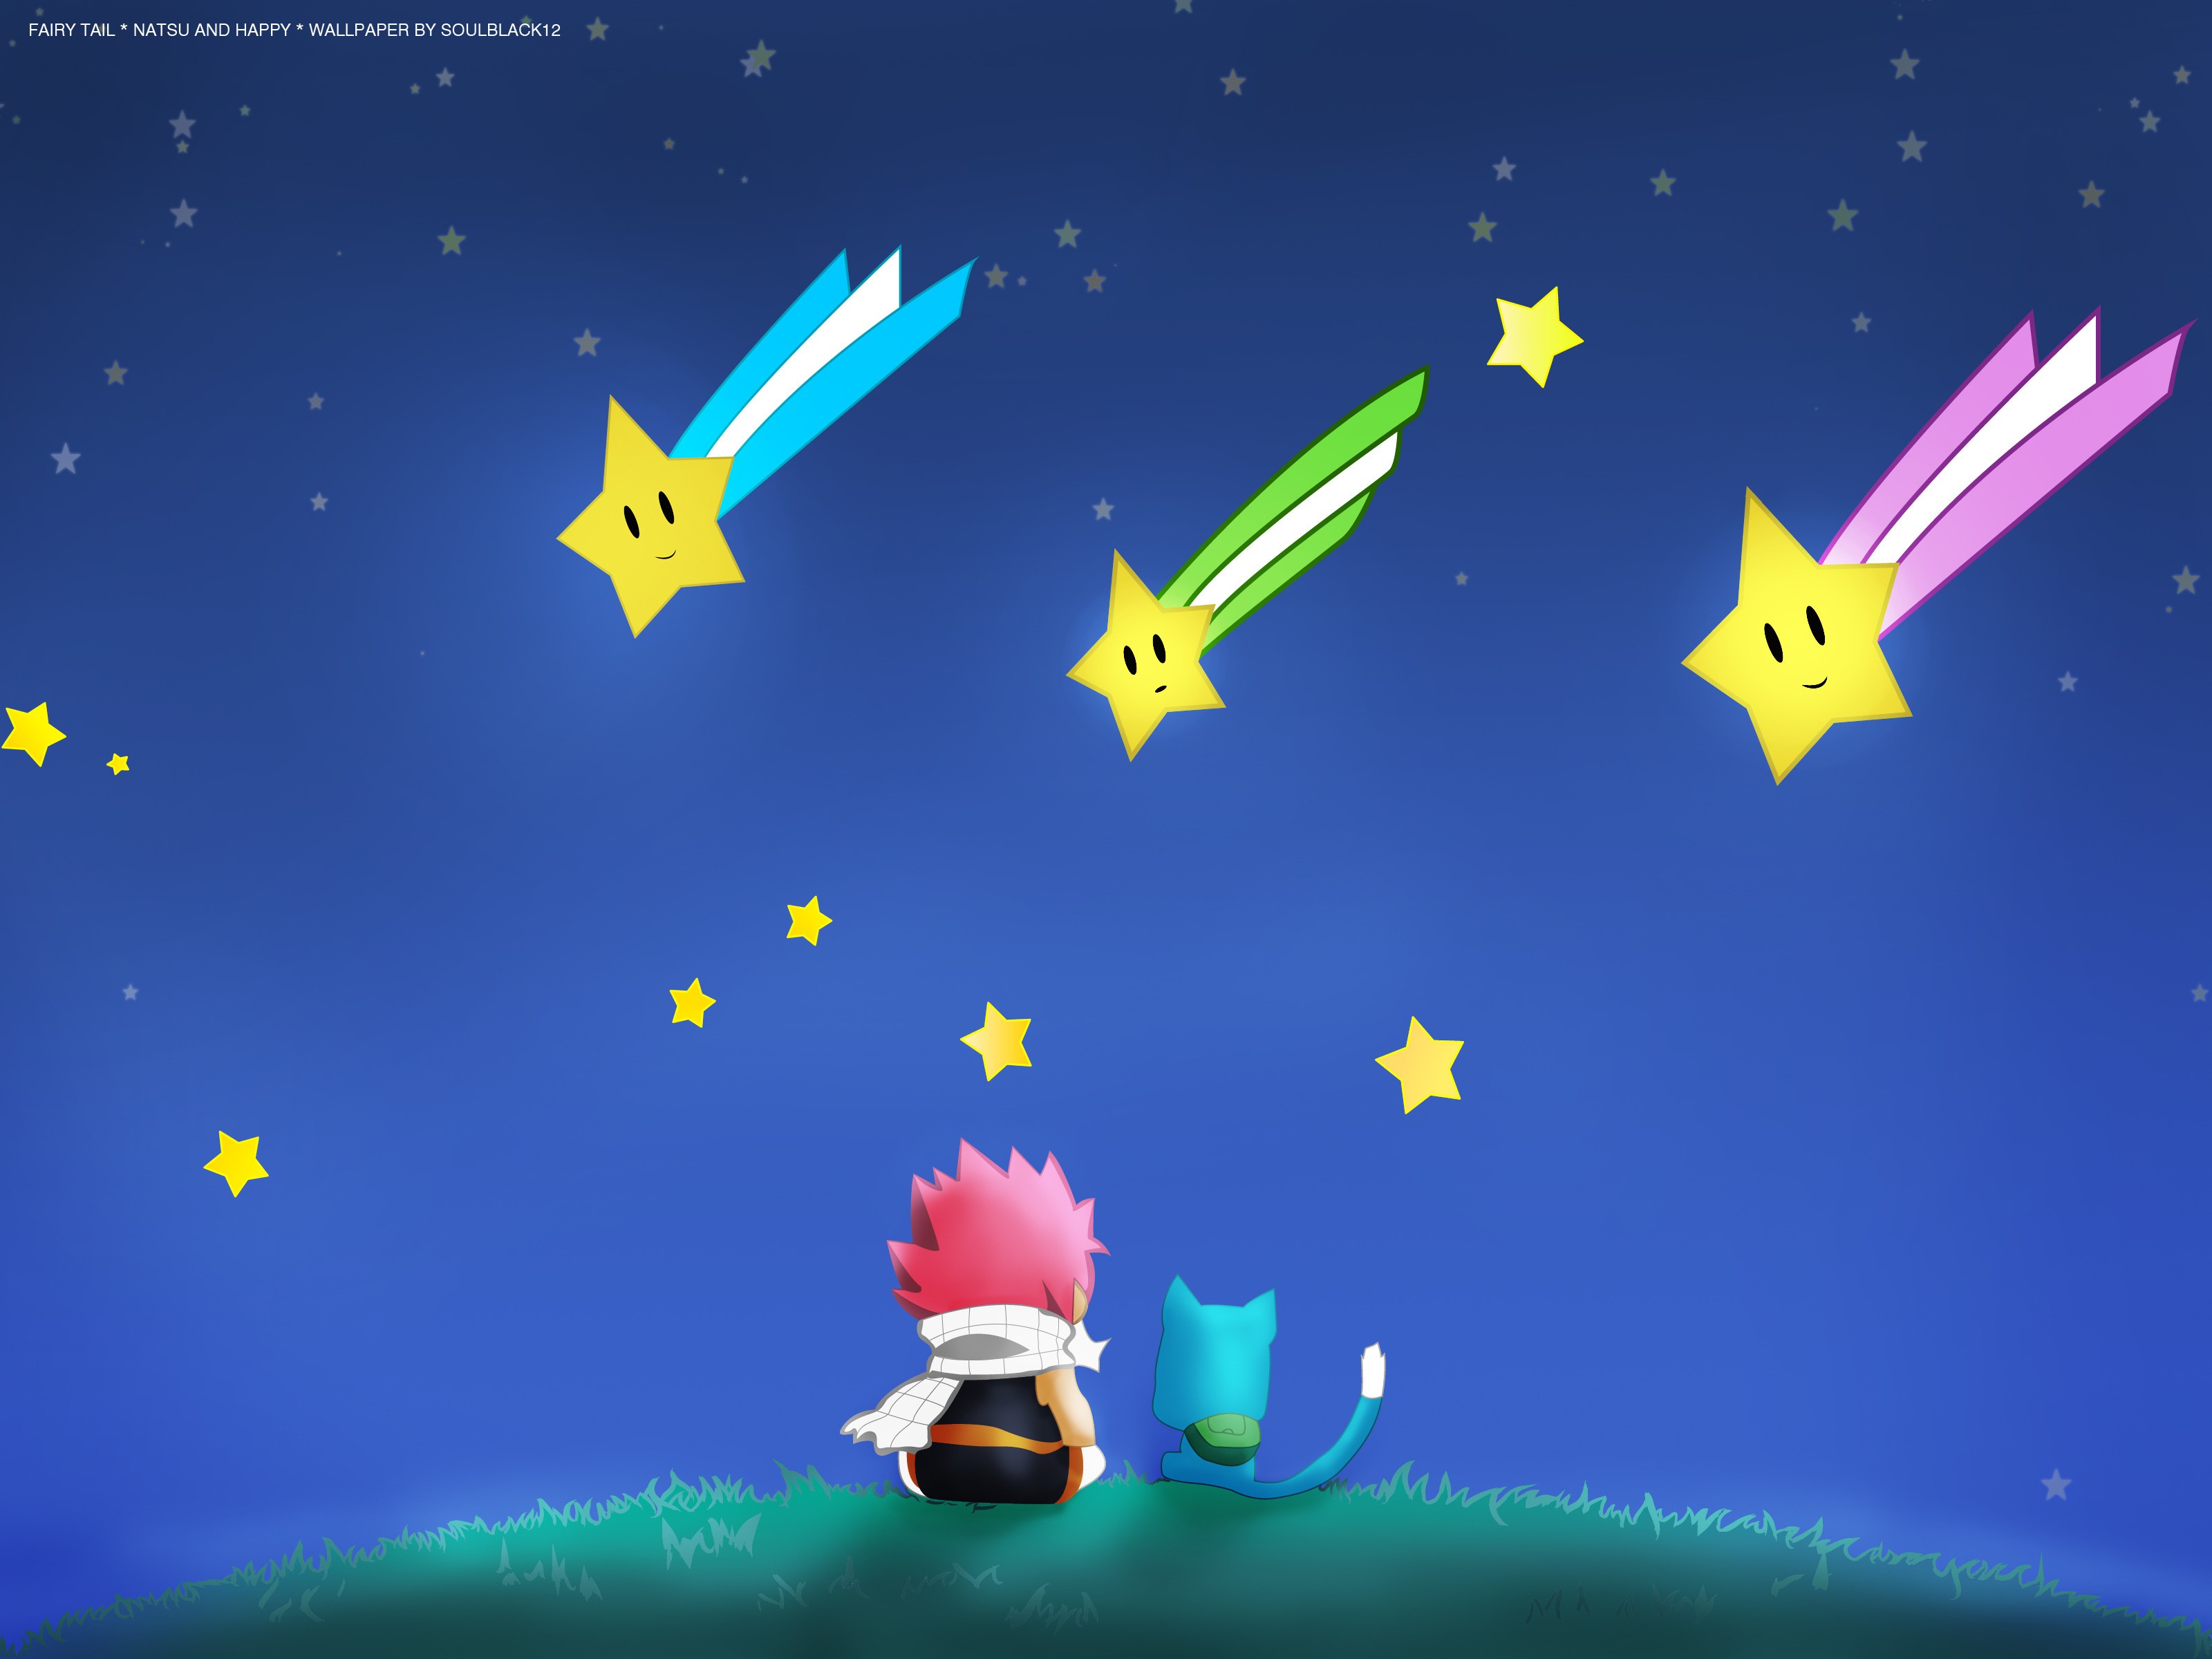 fairy tail wallpaper,cartoon,sky,space,fictional character,graphic design